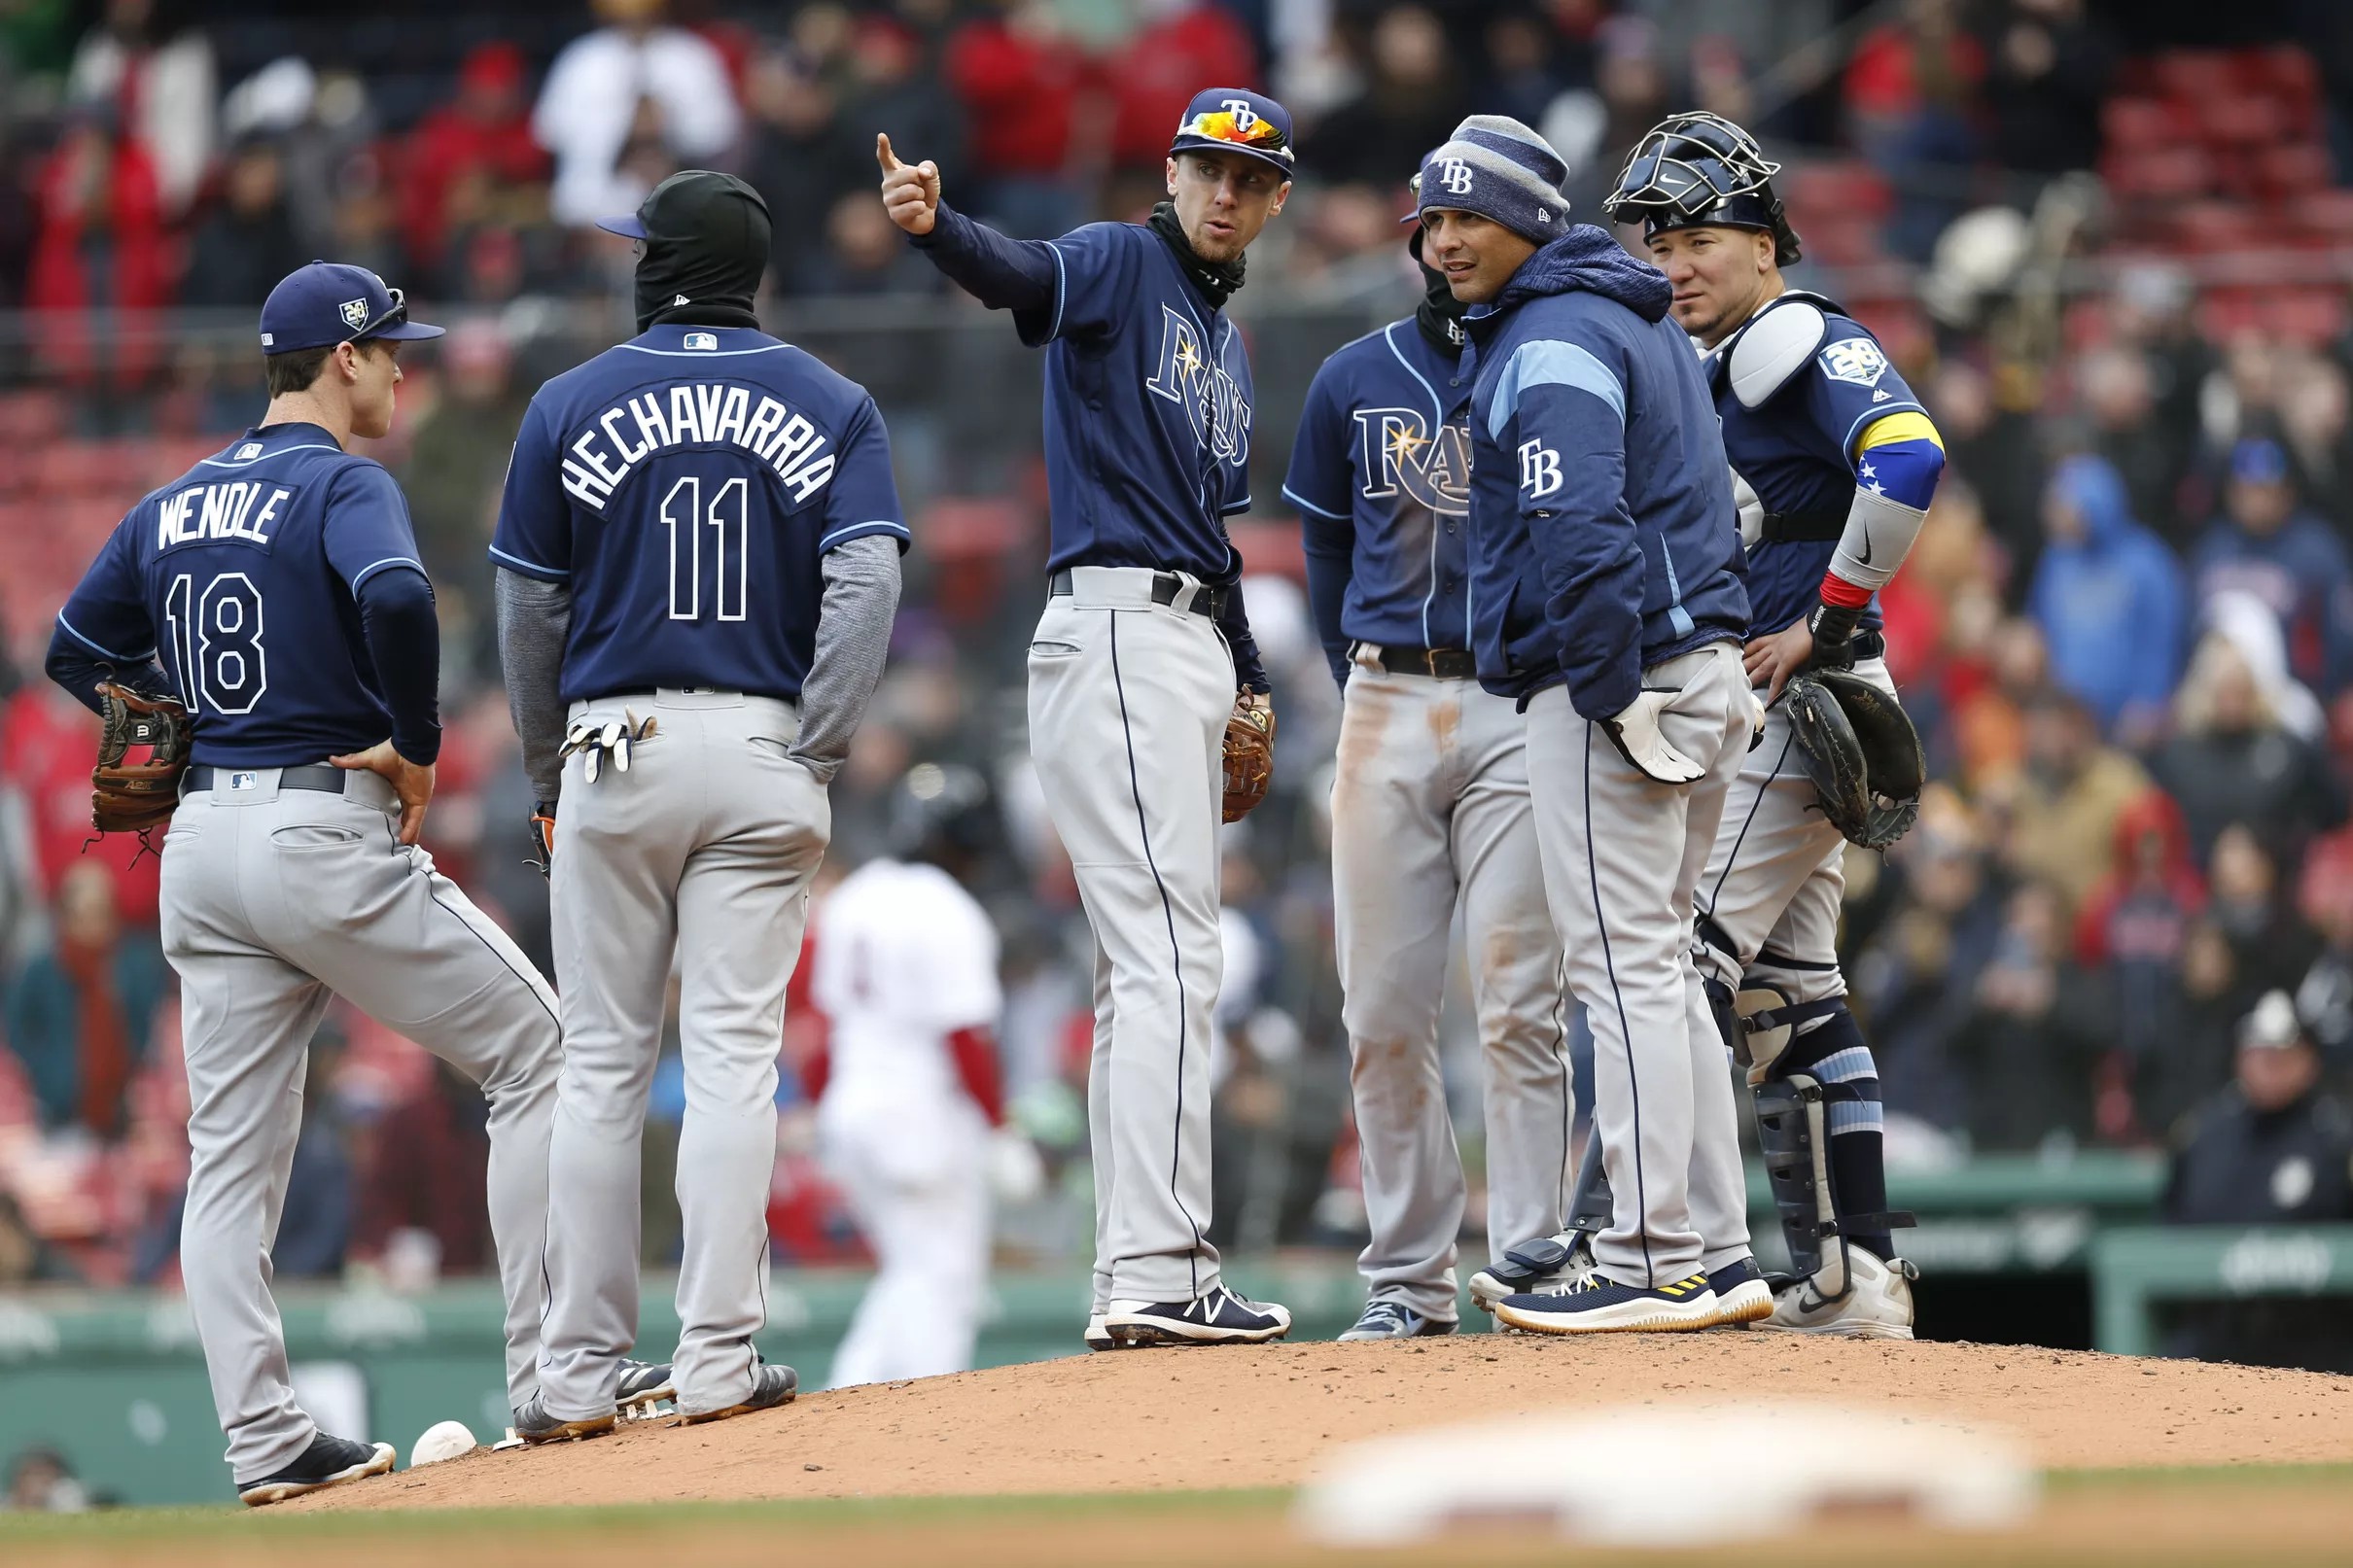 Rays vs. Red Sox Series Preview Return to Fenway, hopefully with